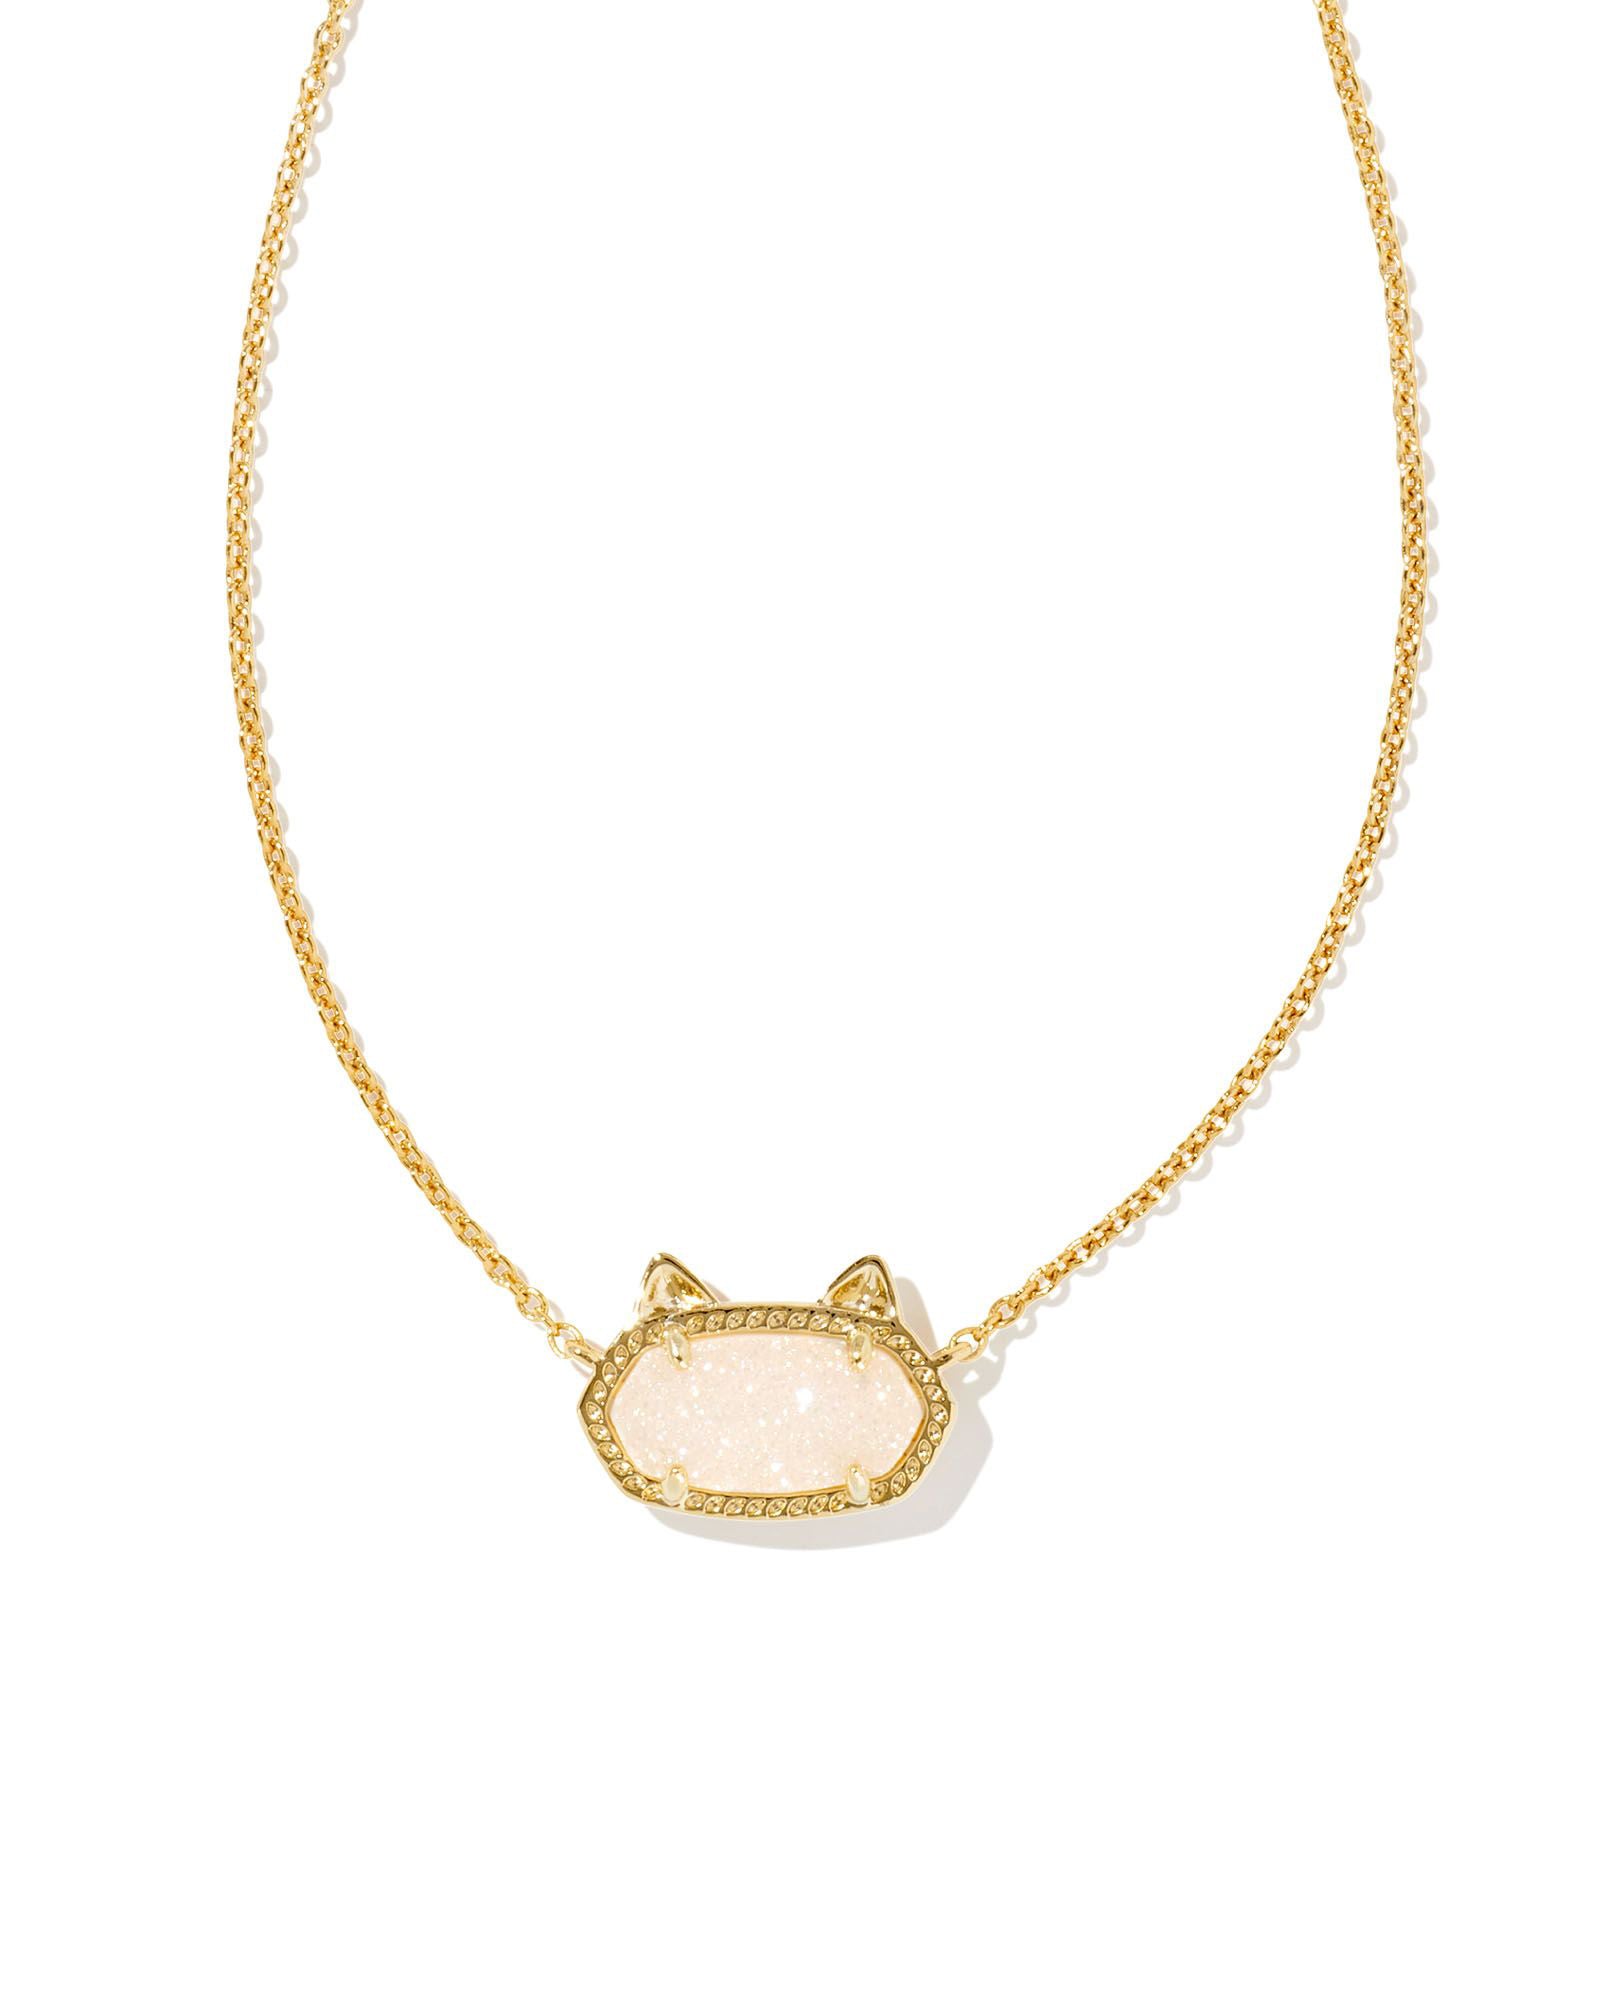 Kendra Scott Elisa Cat Oval Pendant Necklace in Iridescent Drusy and Gold